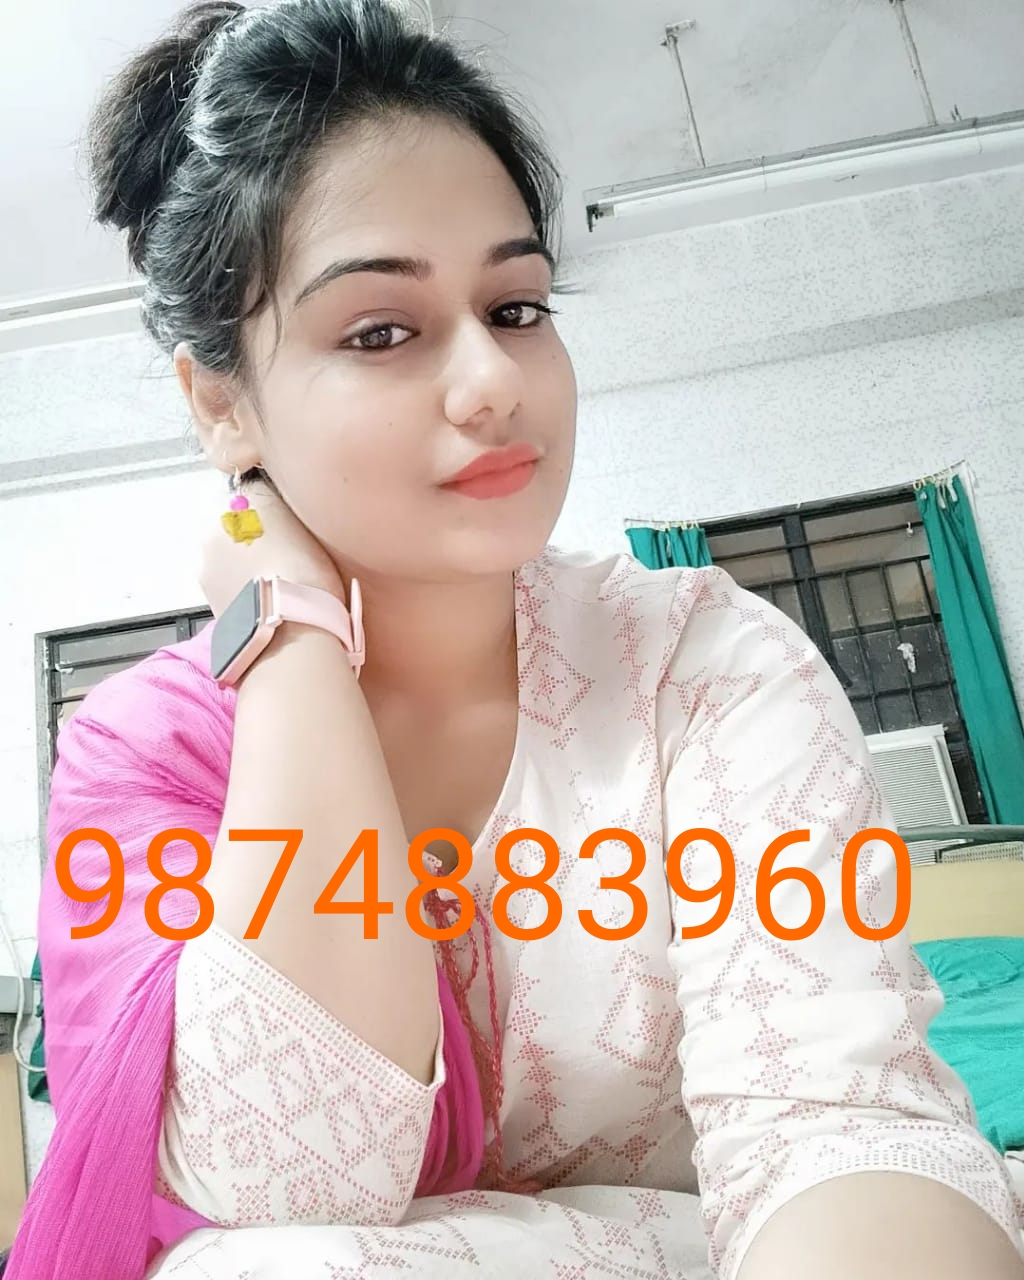 Wagholi safe and secure independent college girl 